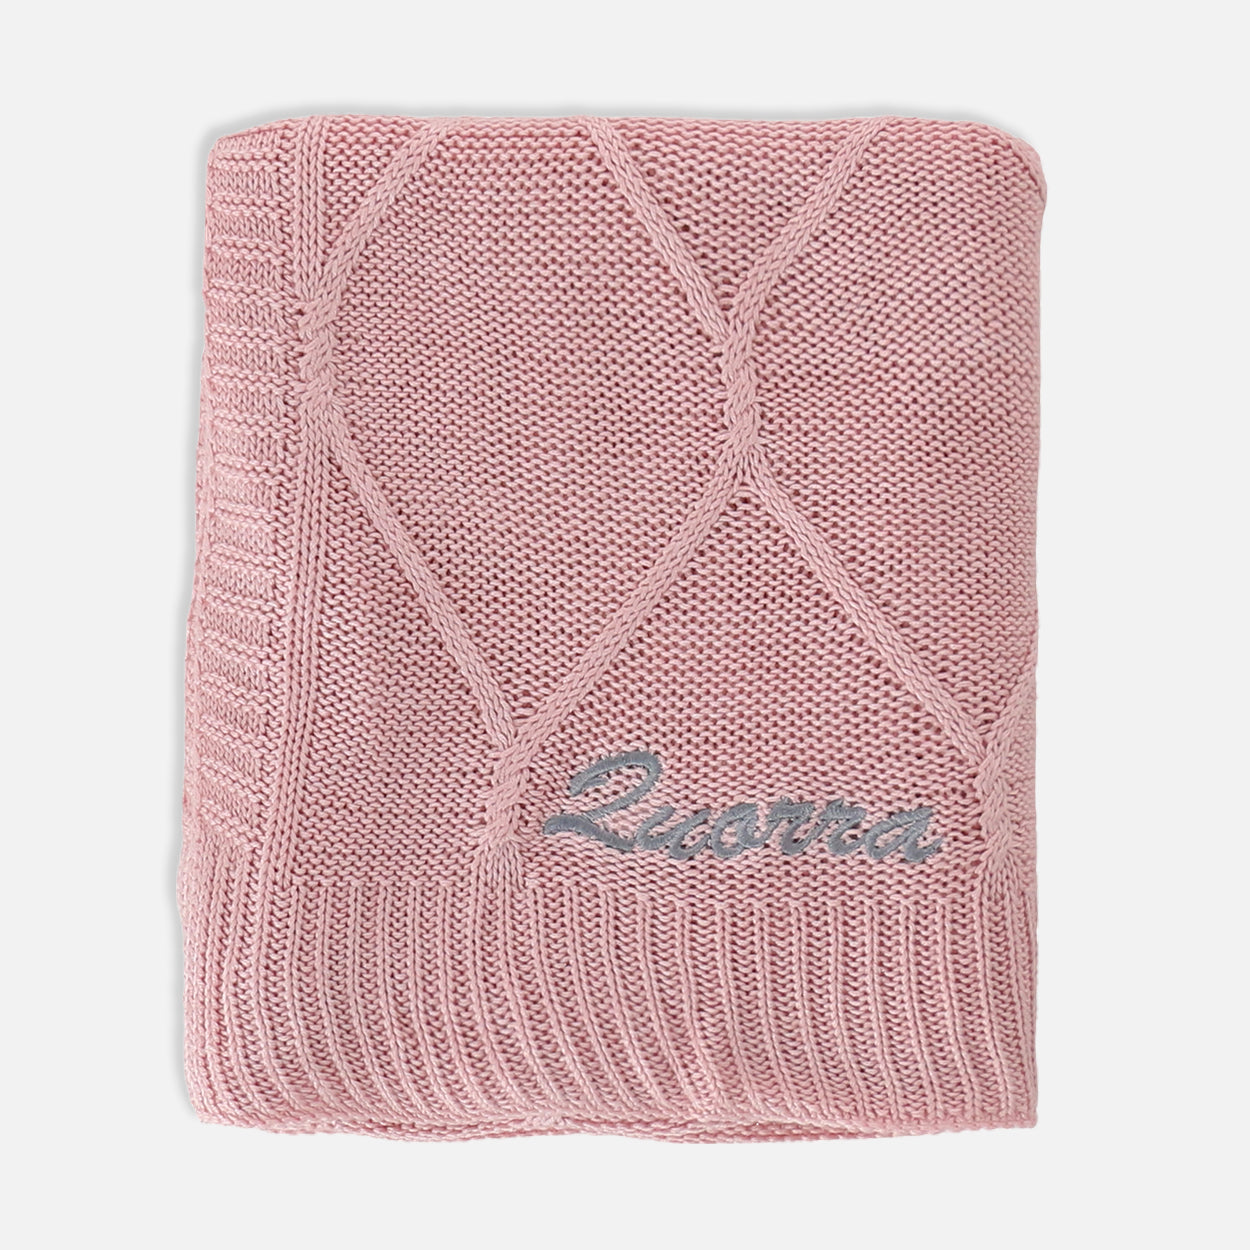 Lux organic bamboo knit blanket | kids Fashion | The Green Collective SG